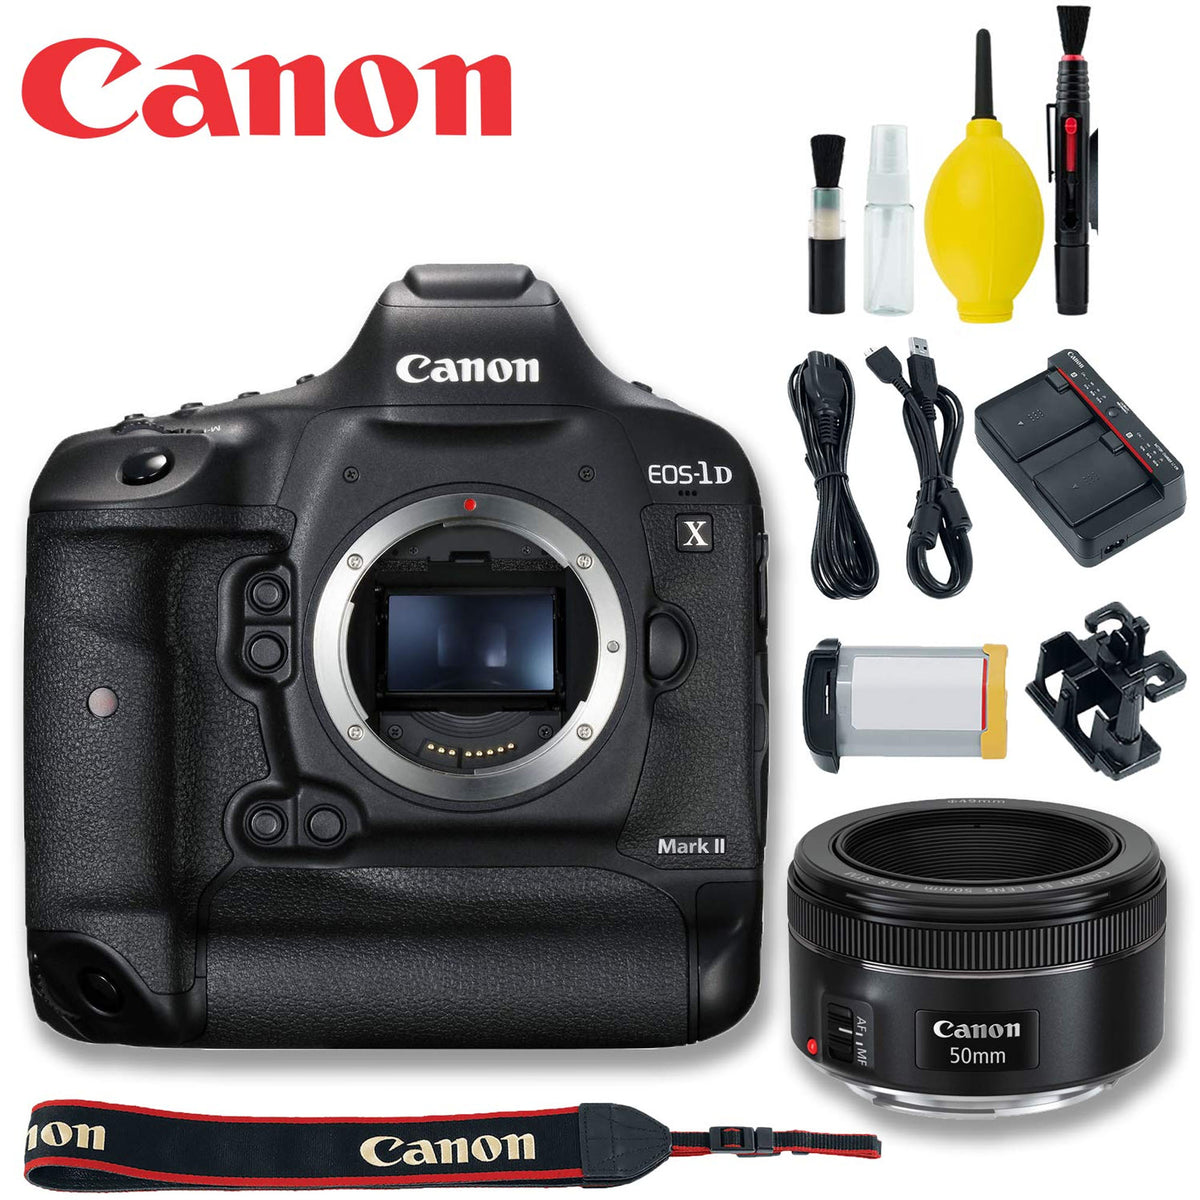 Canon EOS-1D II X Kit Canon 1.8 NJ Basic DSLR STM Camera & Direct Save Accessory/Buy Mark with Lens | 50mm